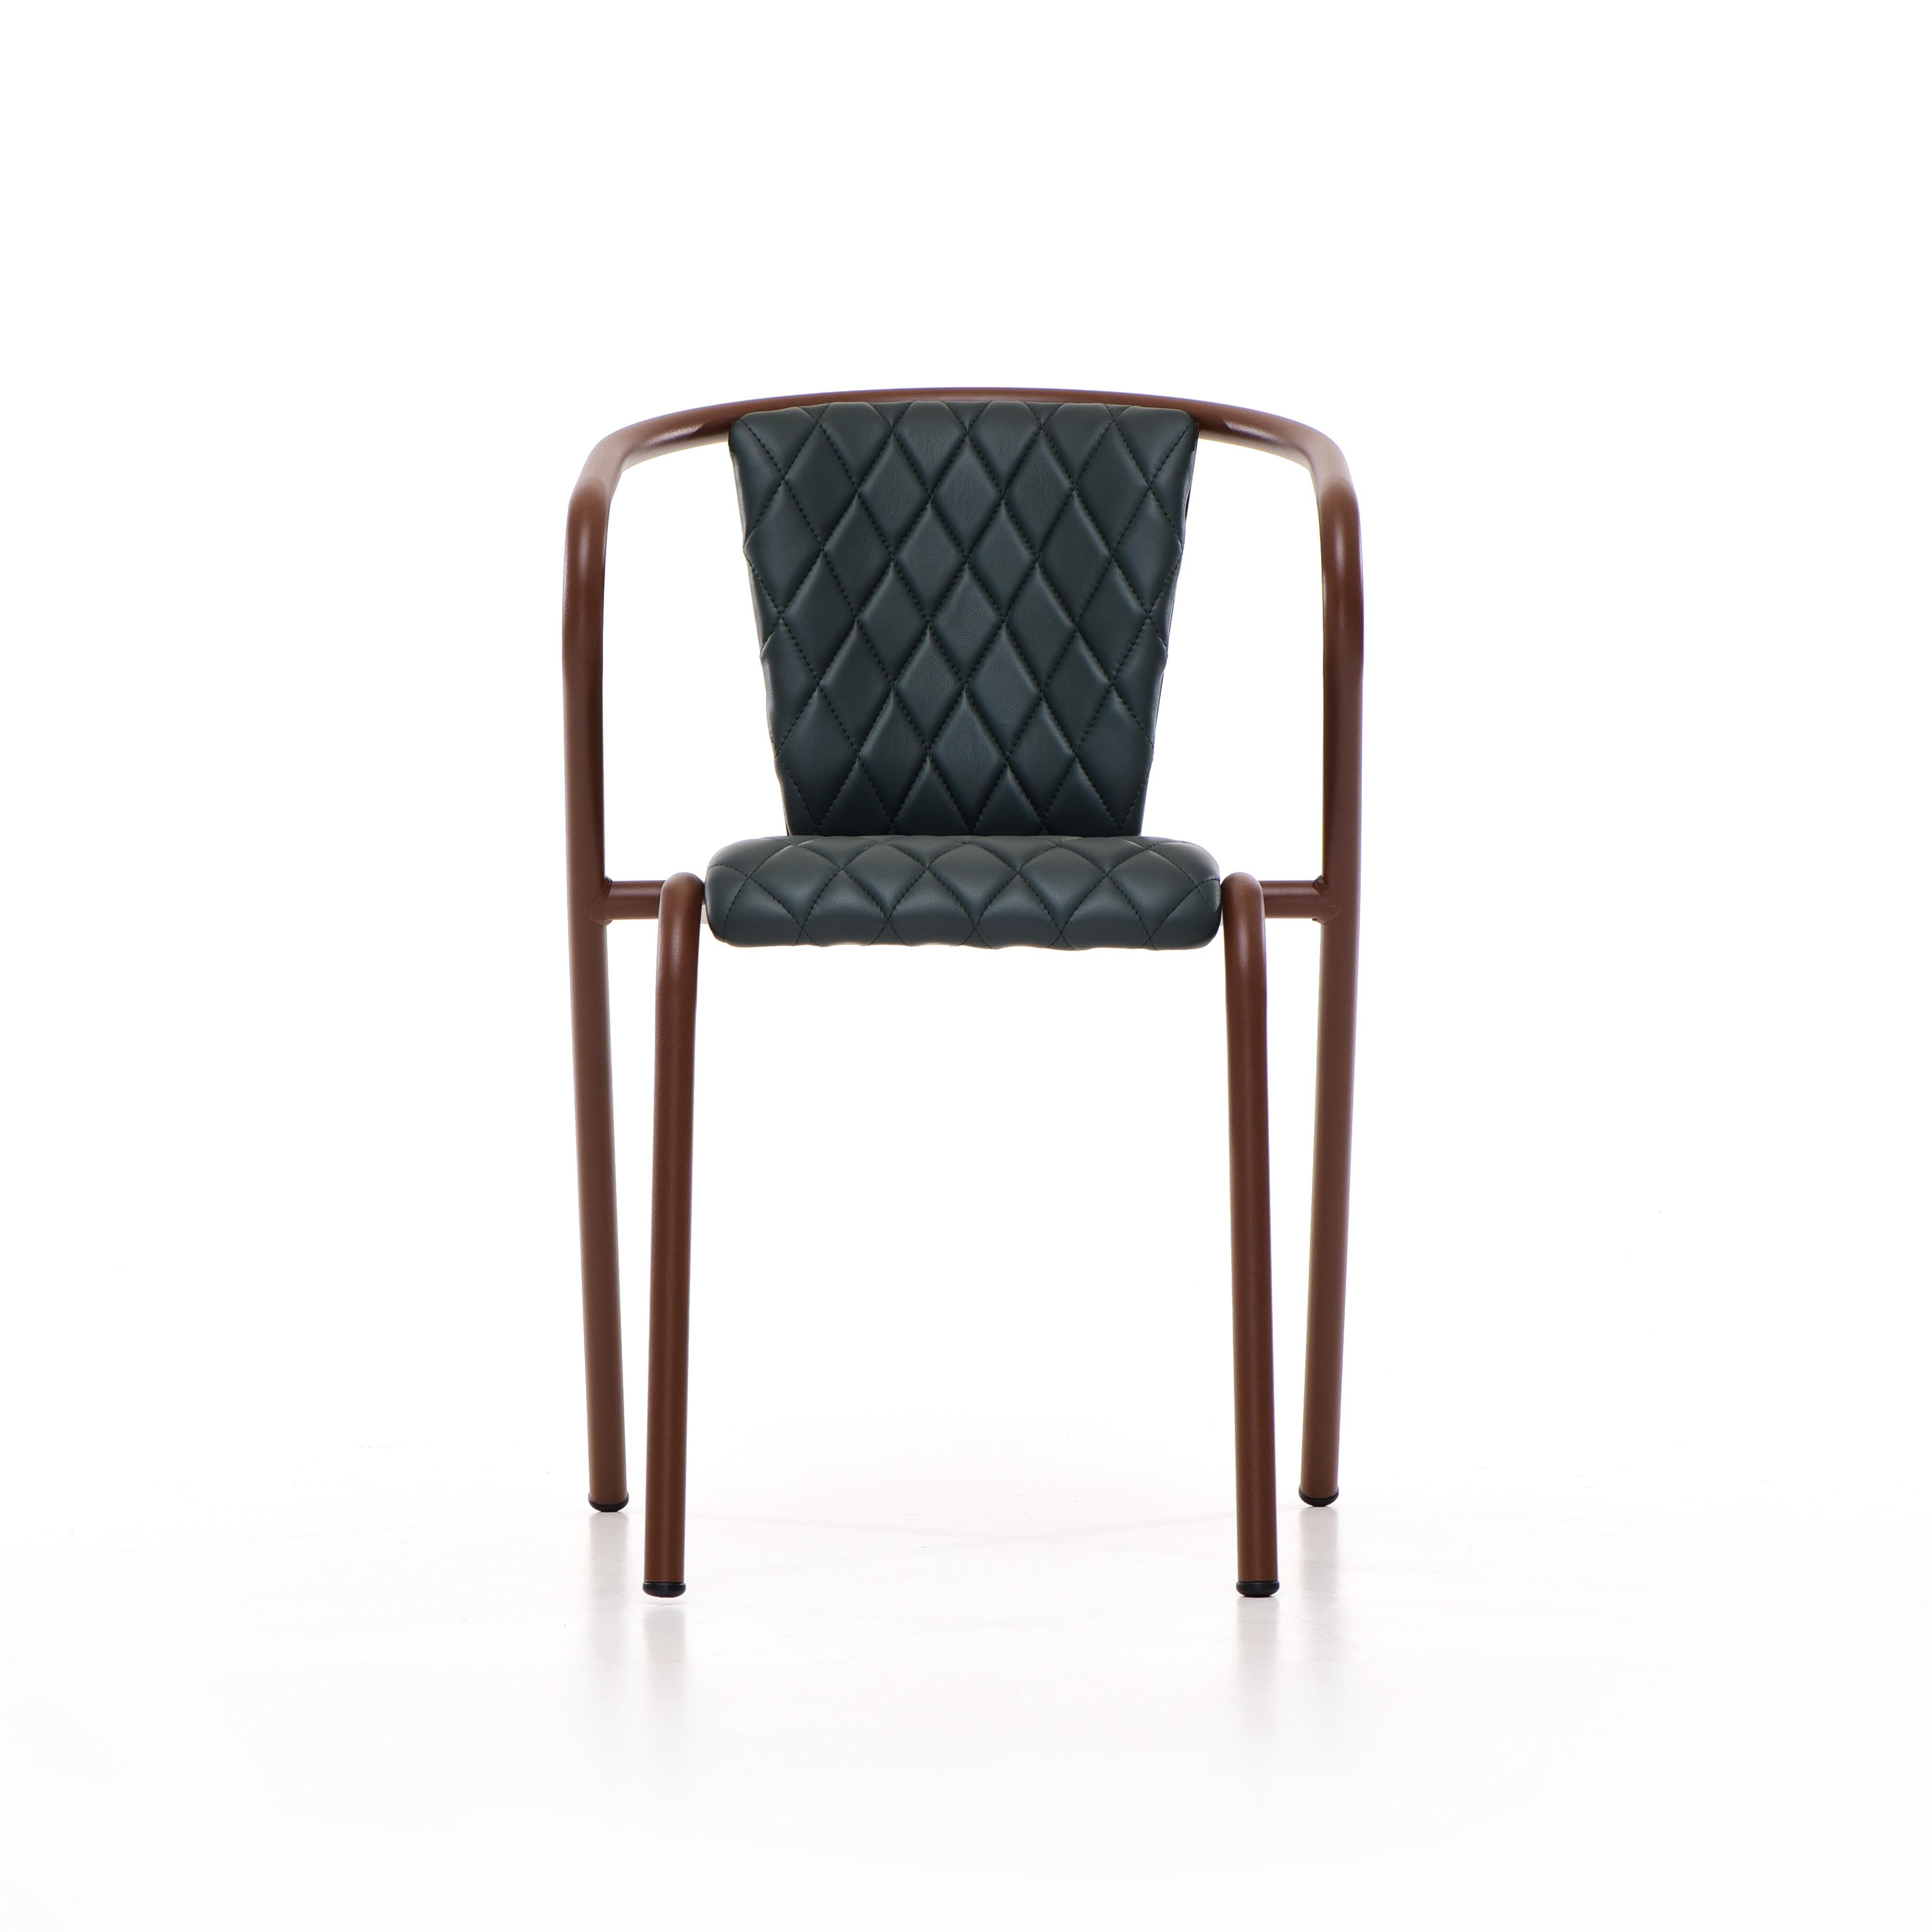 The Bica chair is a comfortable stackable steel dining armchair made from recycled and recyclable steel, finished with our premium selection of powder-coating colors, in this case in a texturized rich Brown, that transform a classic in something new